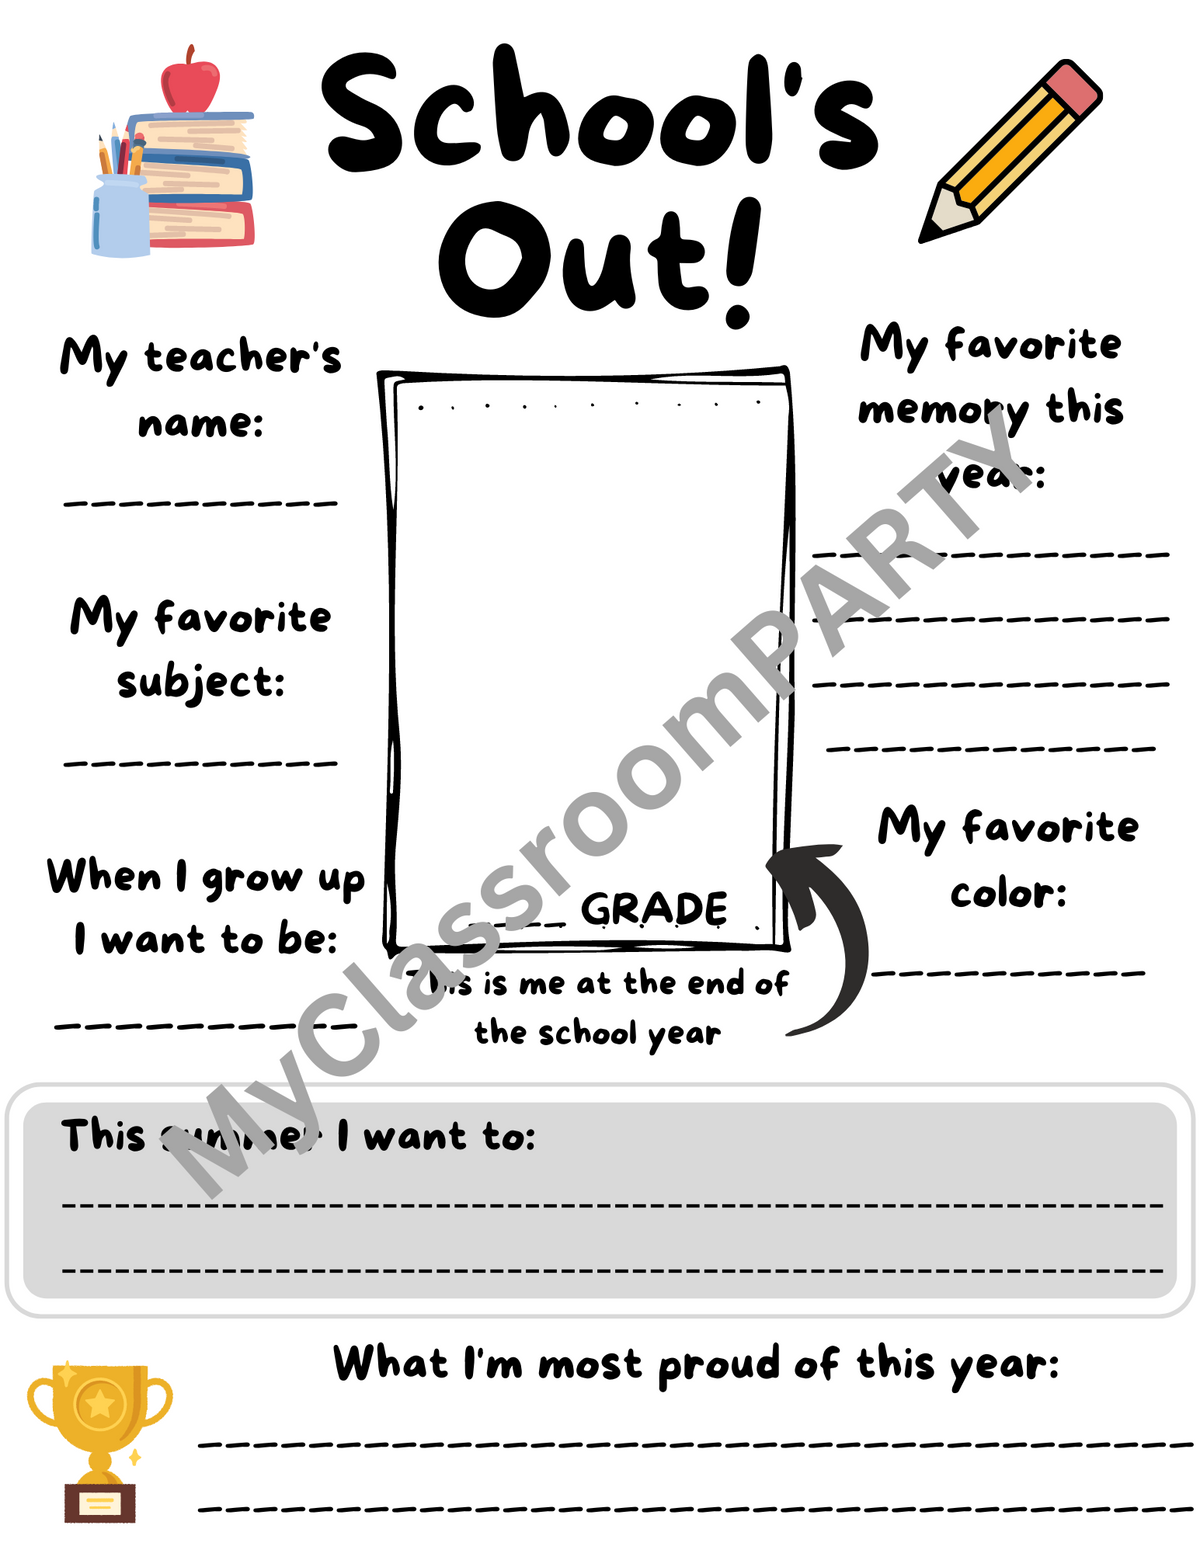 Print out students can fill out about their school year to remember it